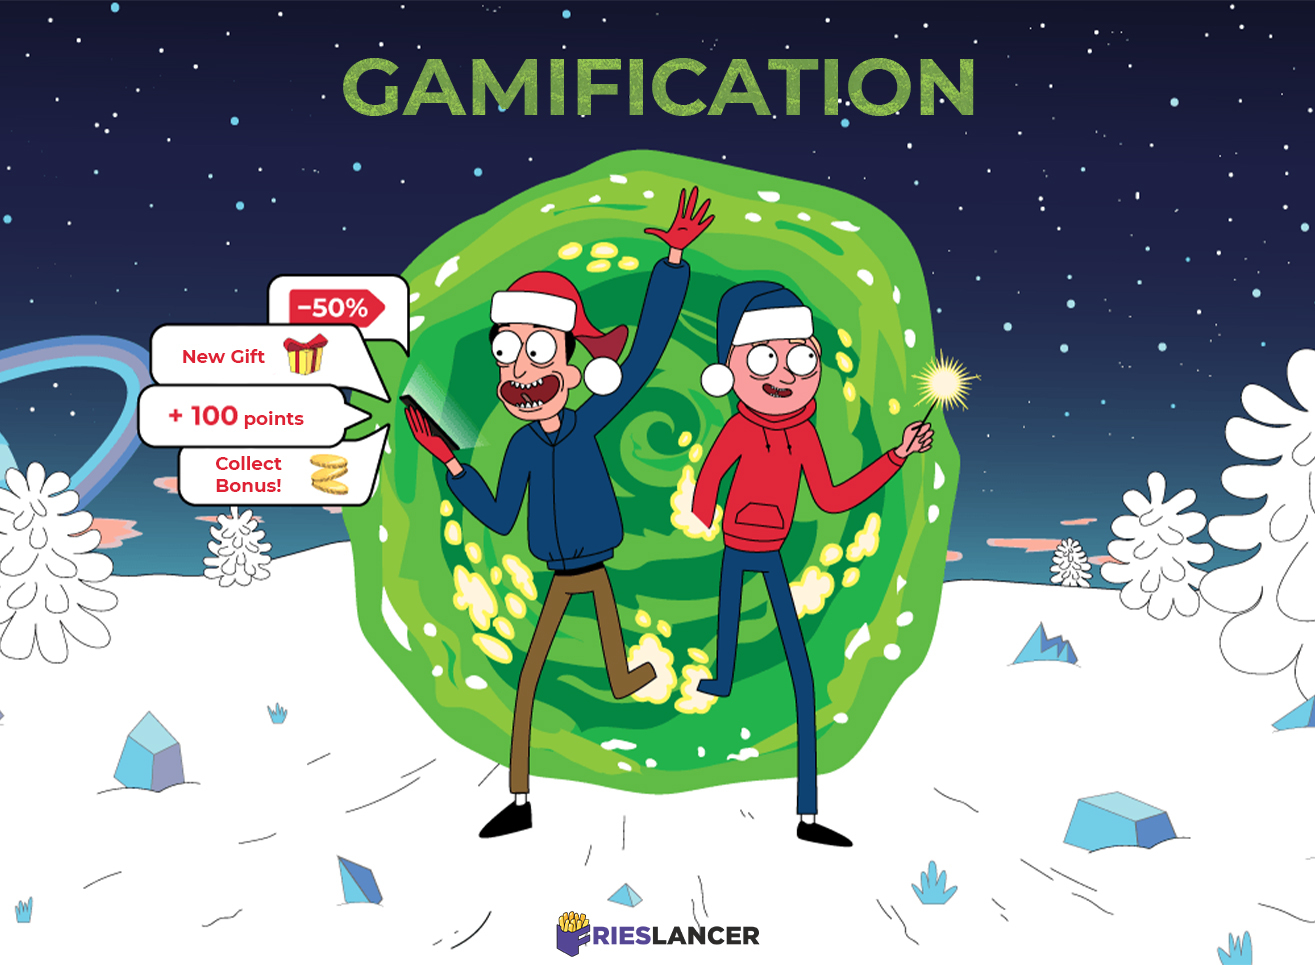 Gamification For The New Year, Which Will Increase Conversions And The Average Check In Your App.